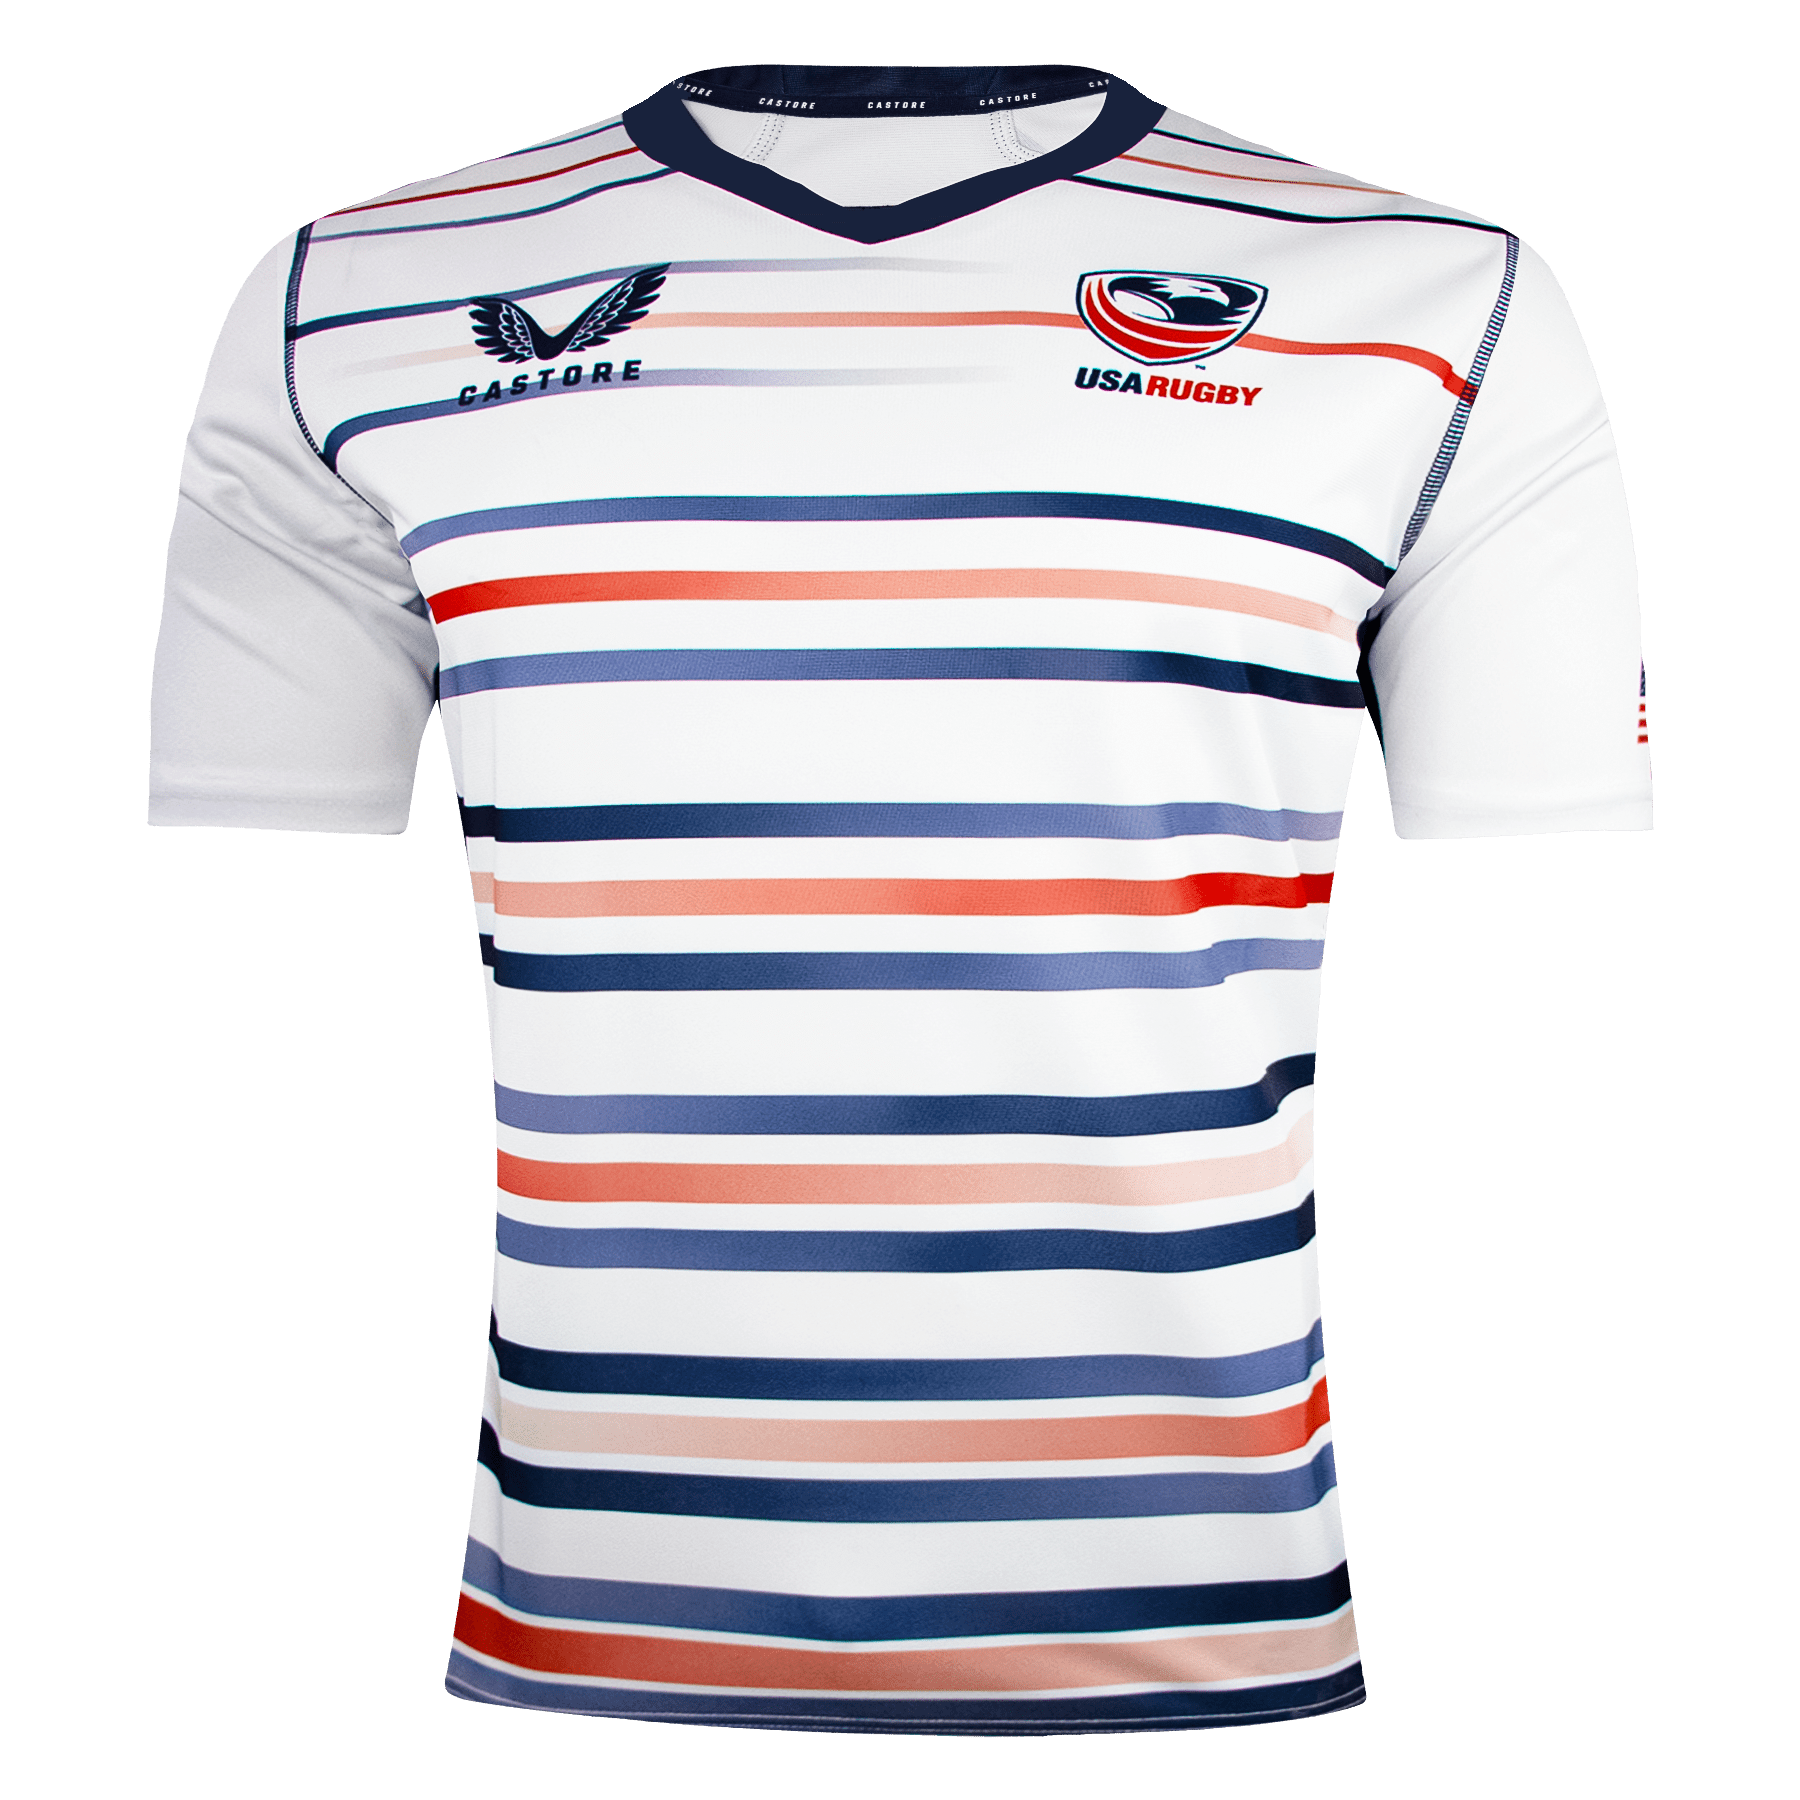 Adidas vintage rugby jersey Argentina 2007 - We Love Sports Shirts